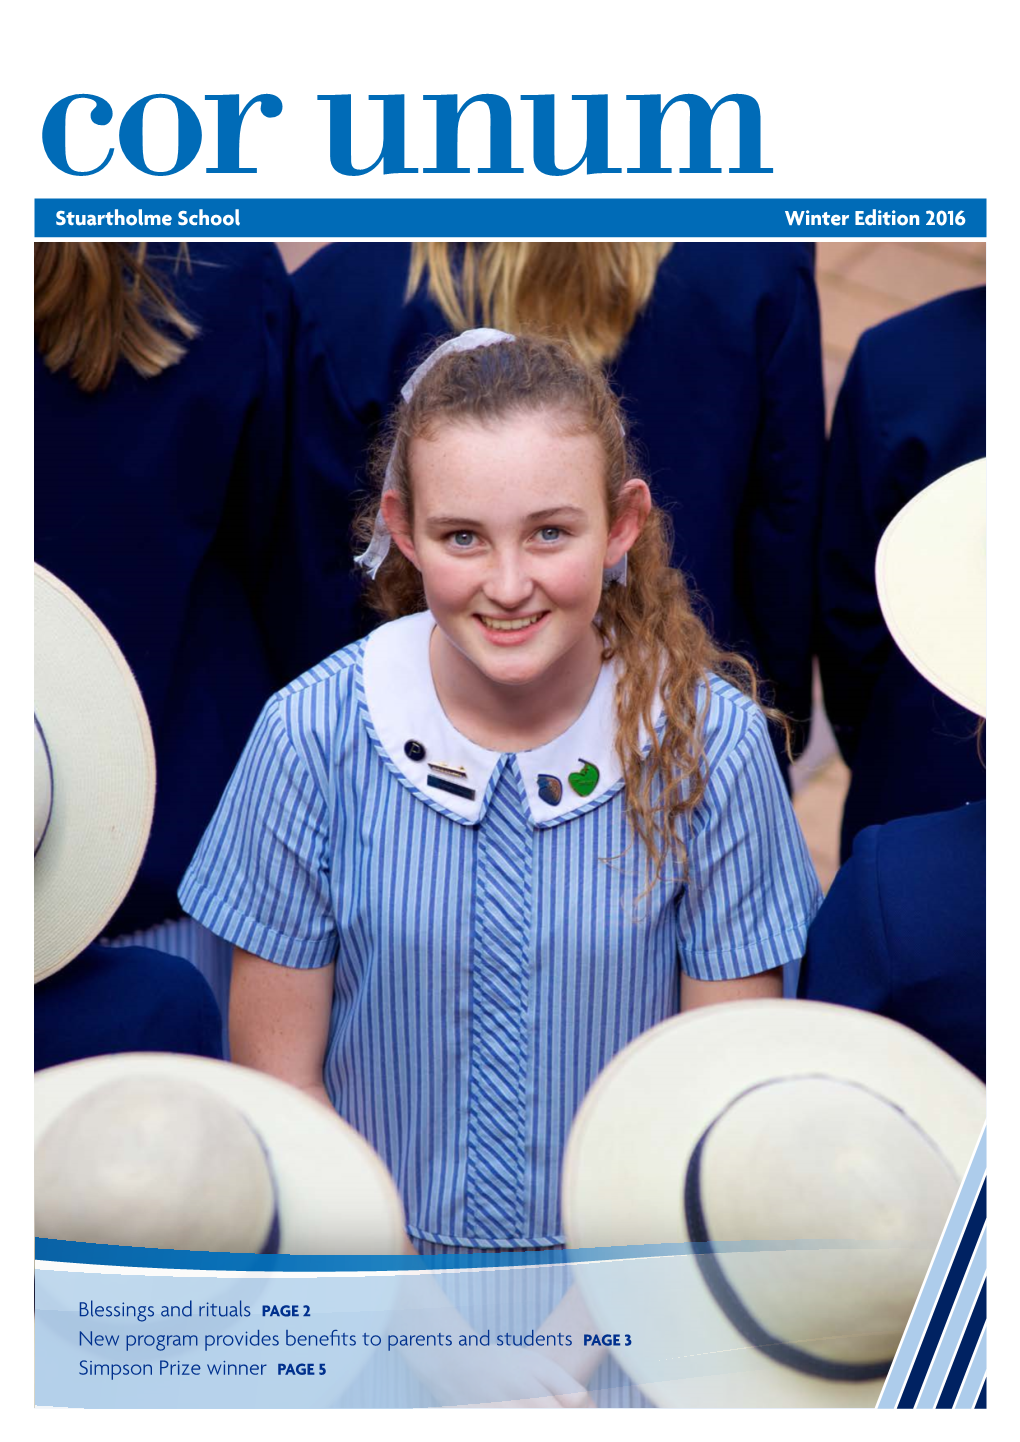 Winter Edition 2016 Stuartholme School Blessings and Rituals PAGE